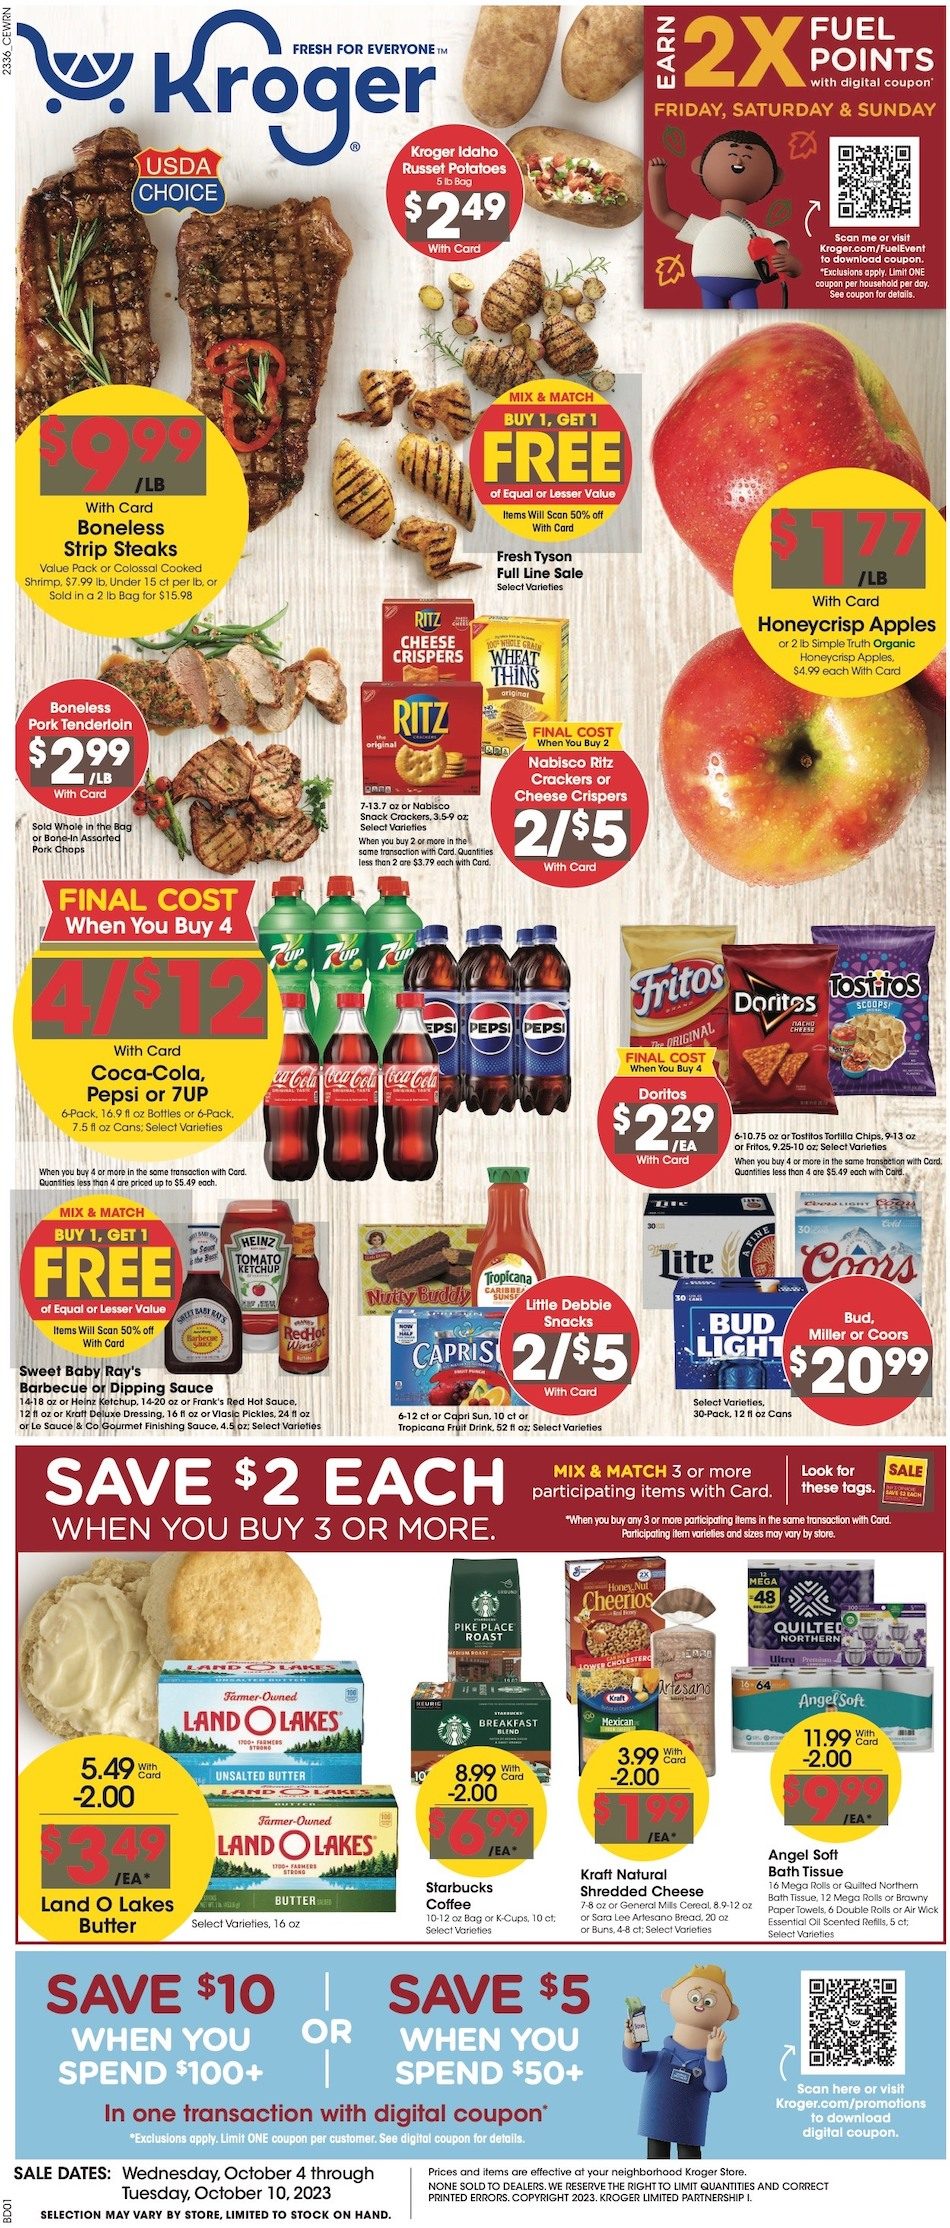 Kroger Weekly Ad 4th – 10th October 2023 Page 1